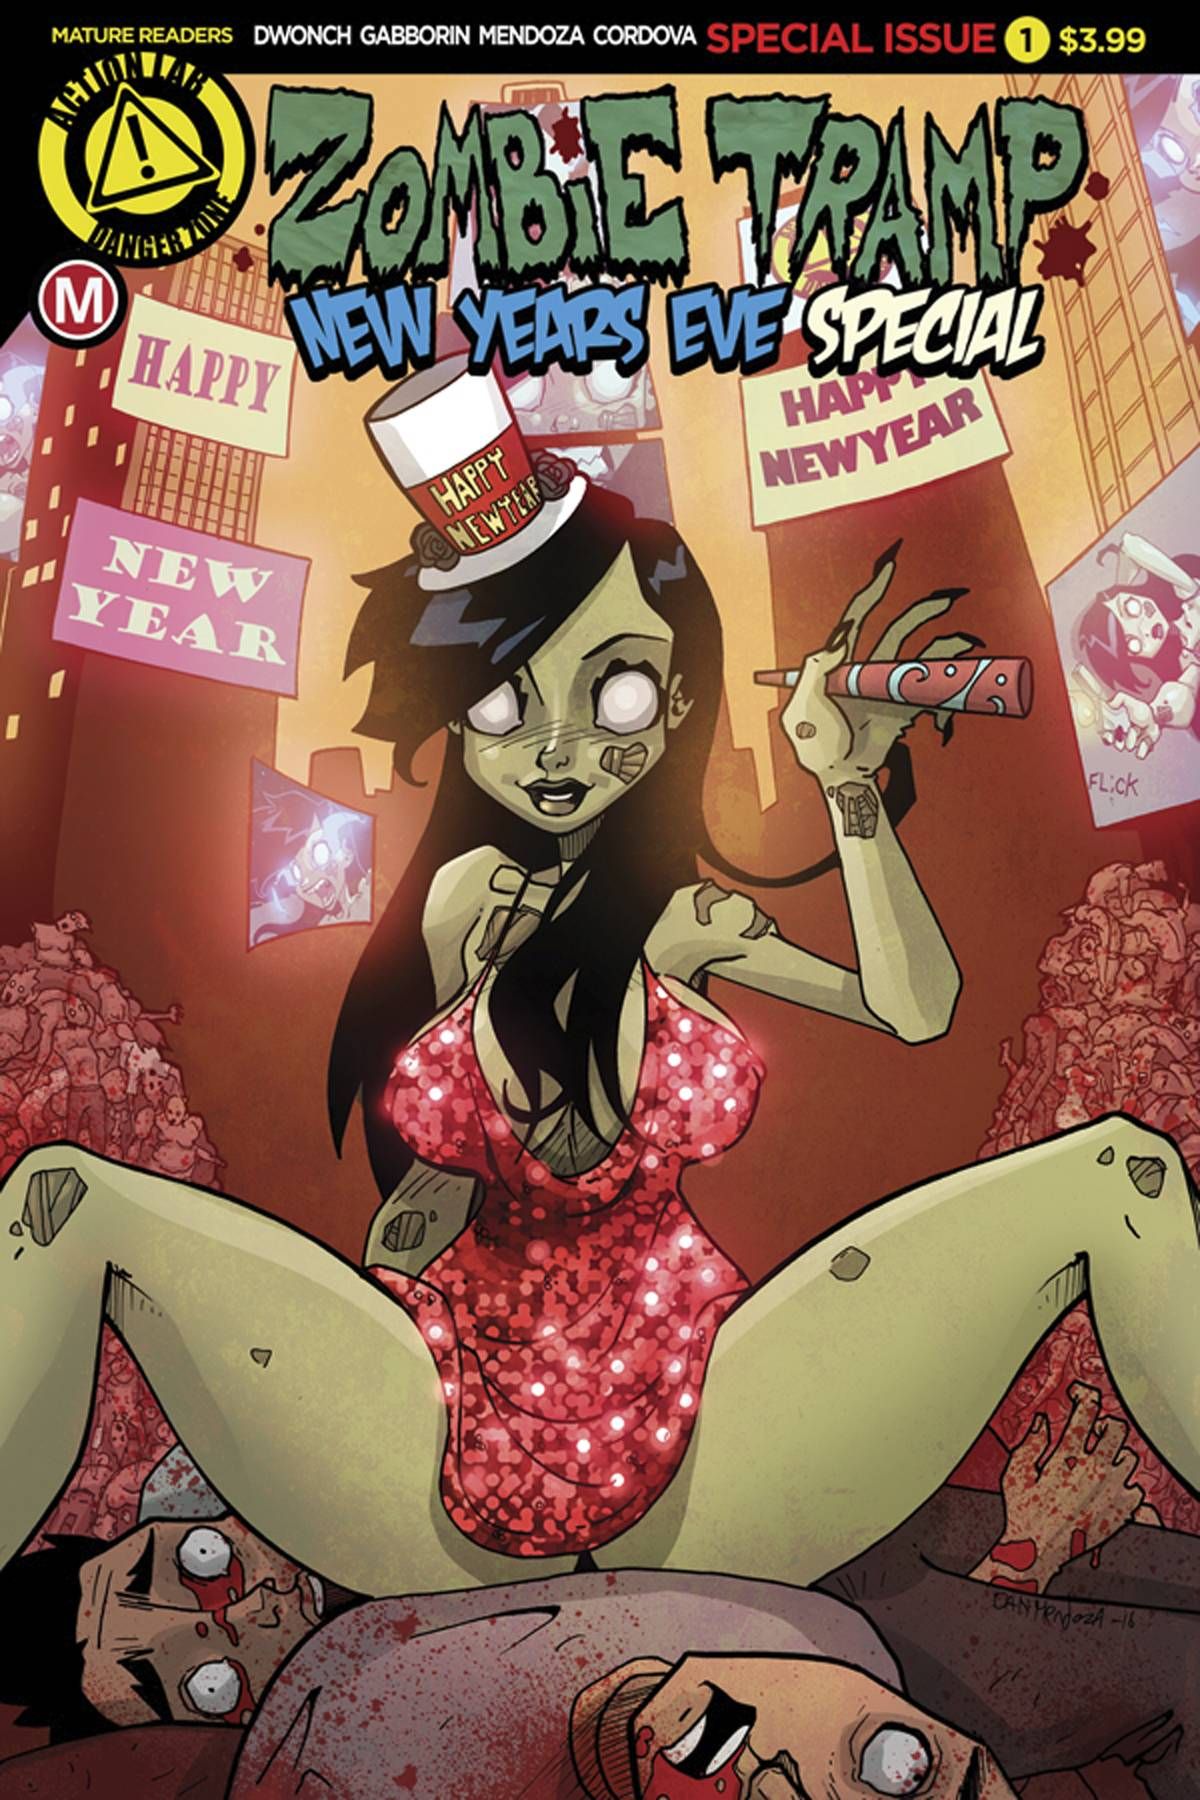 Zombie Tramp: New Years Eve Special #1 Comic